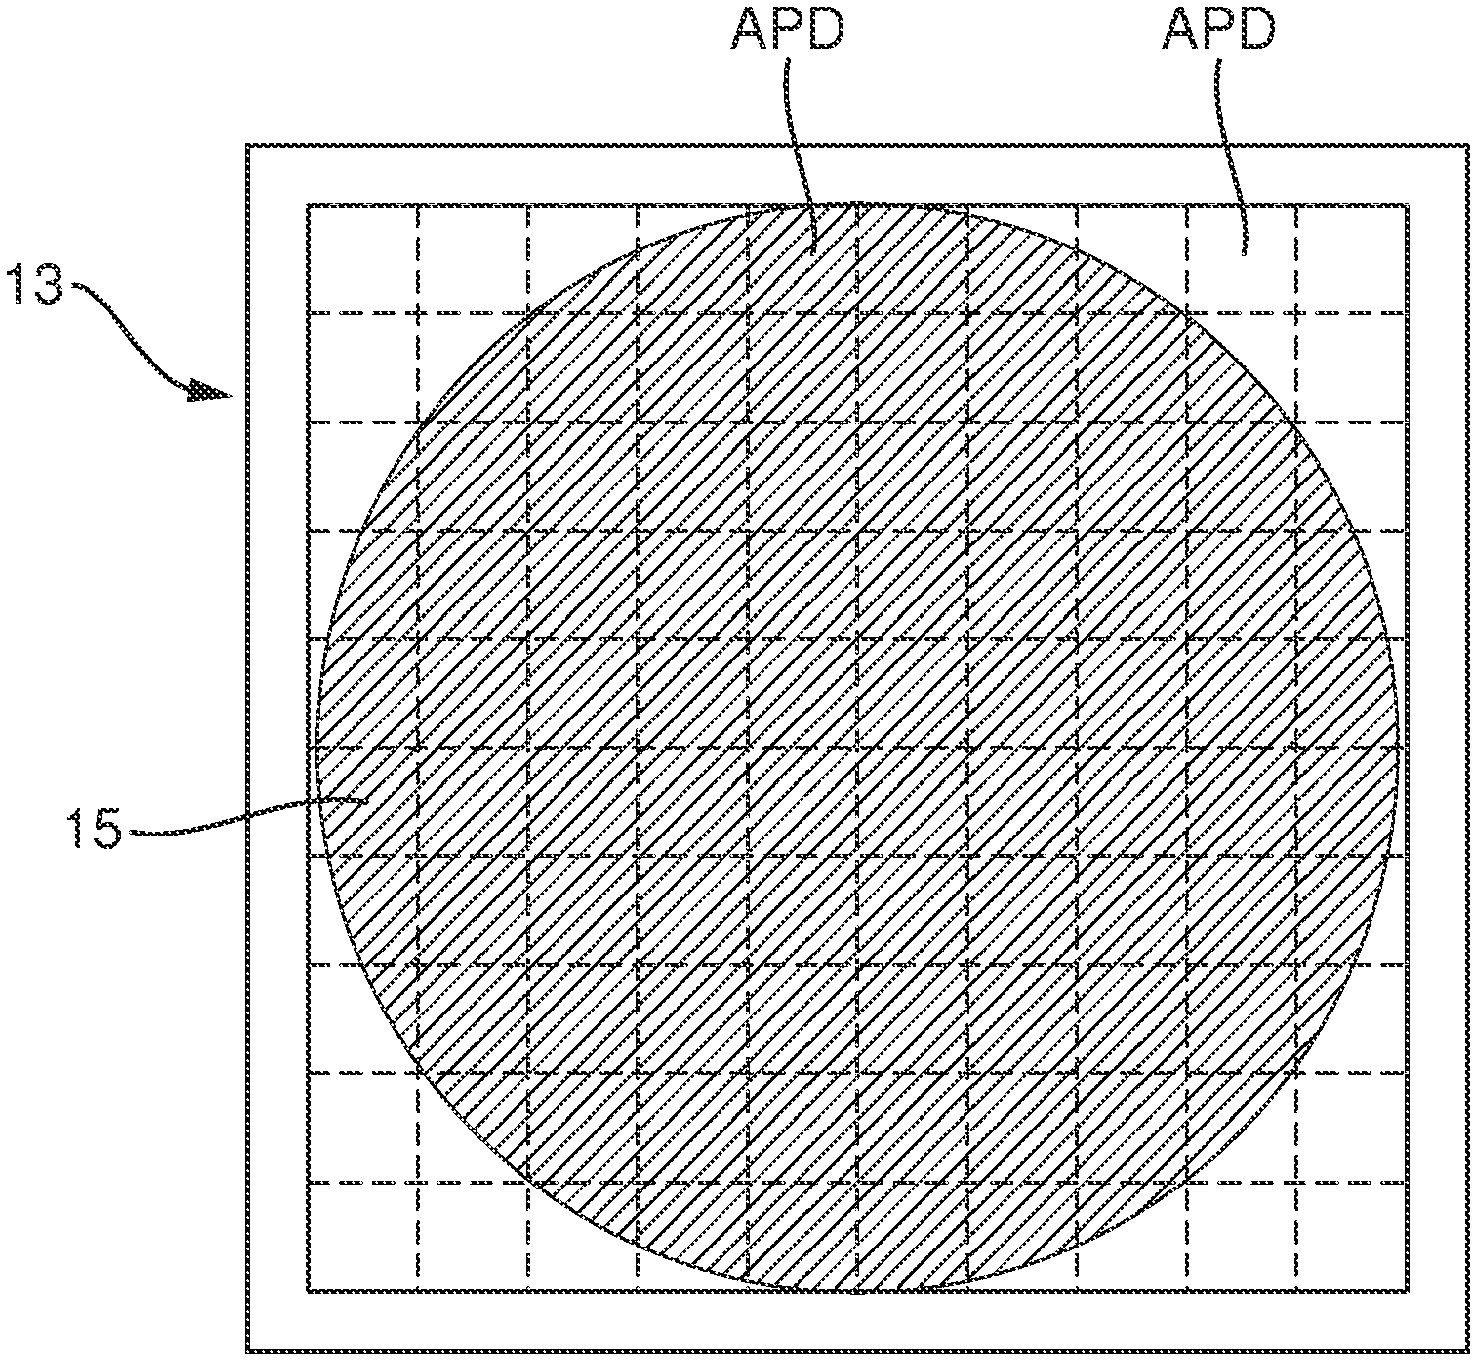 Radiometric measuring device for measuring a filling level or a density of a filling material